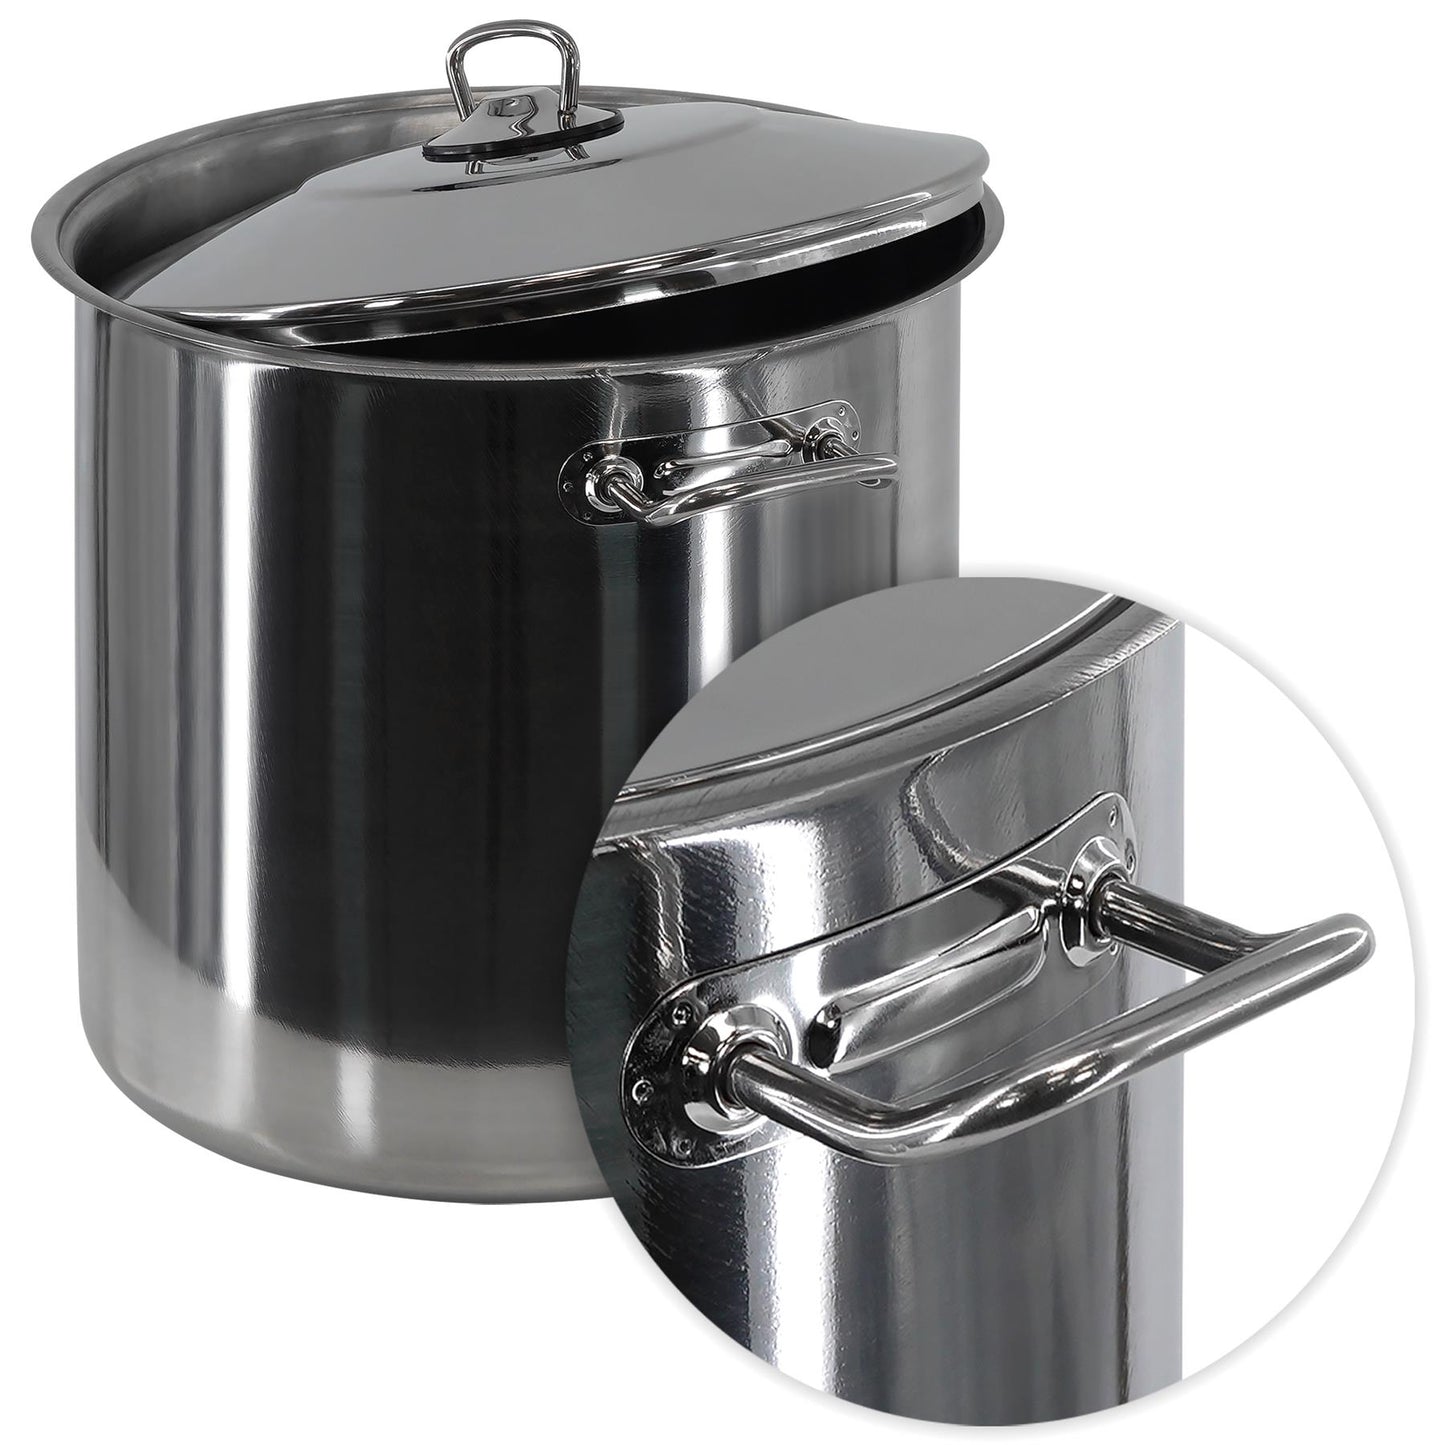 Arian Gastro Stock Pot - 14 Litre by GEEZY - UKBuyZone